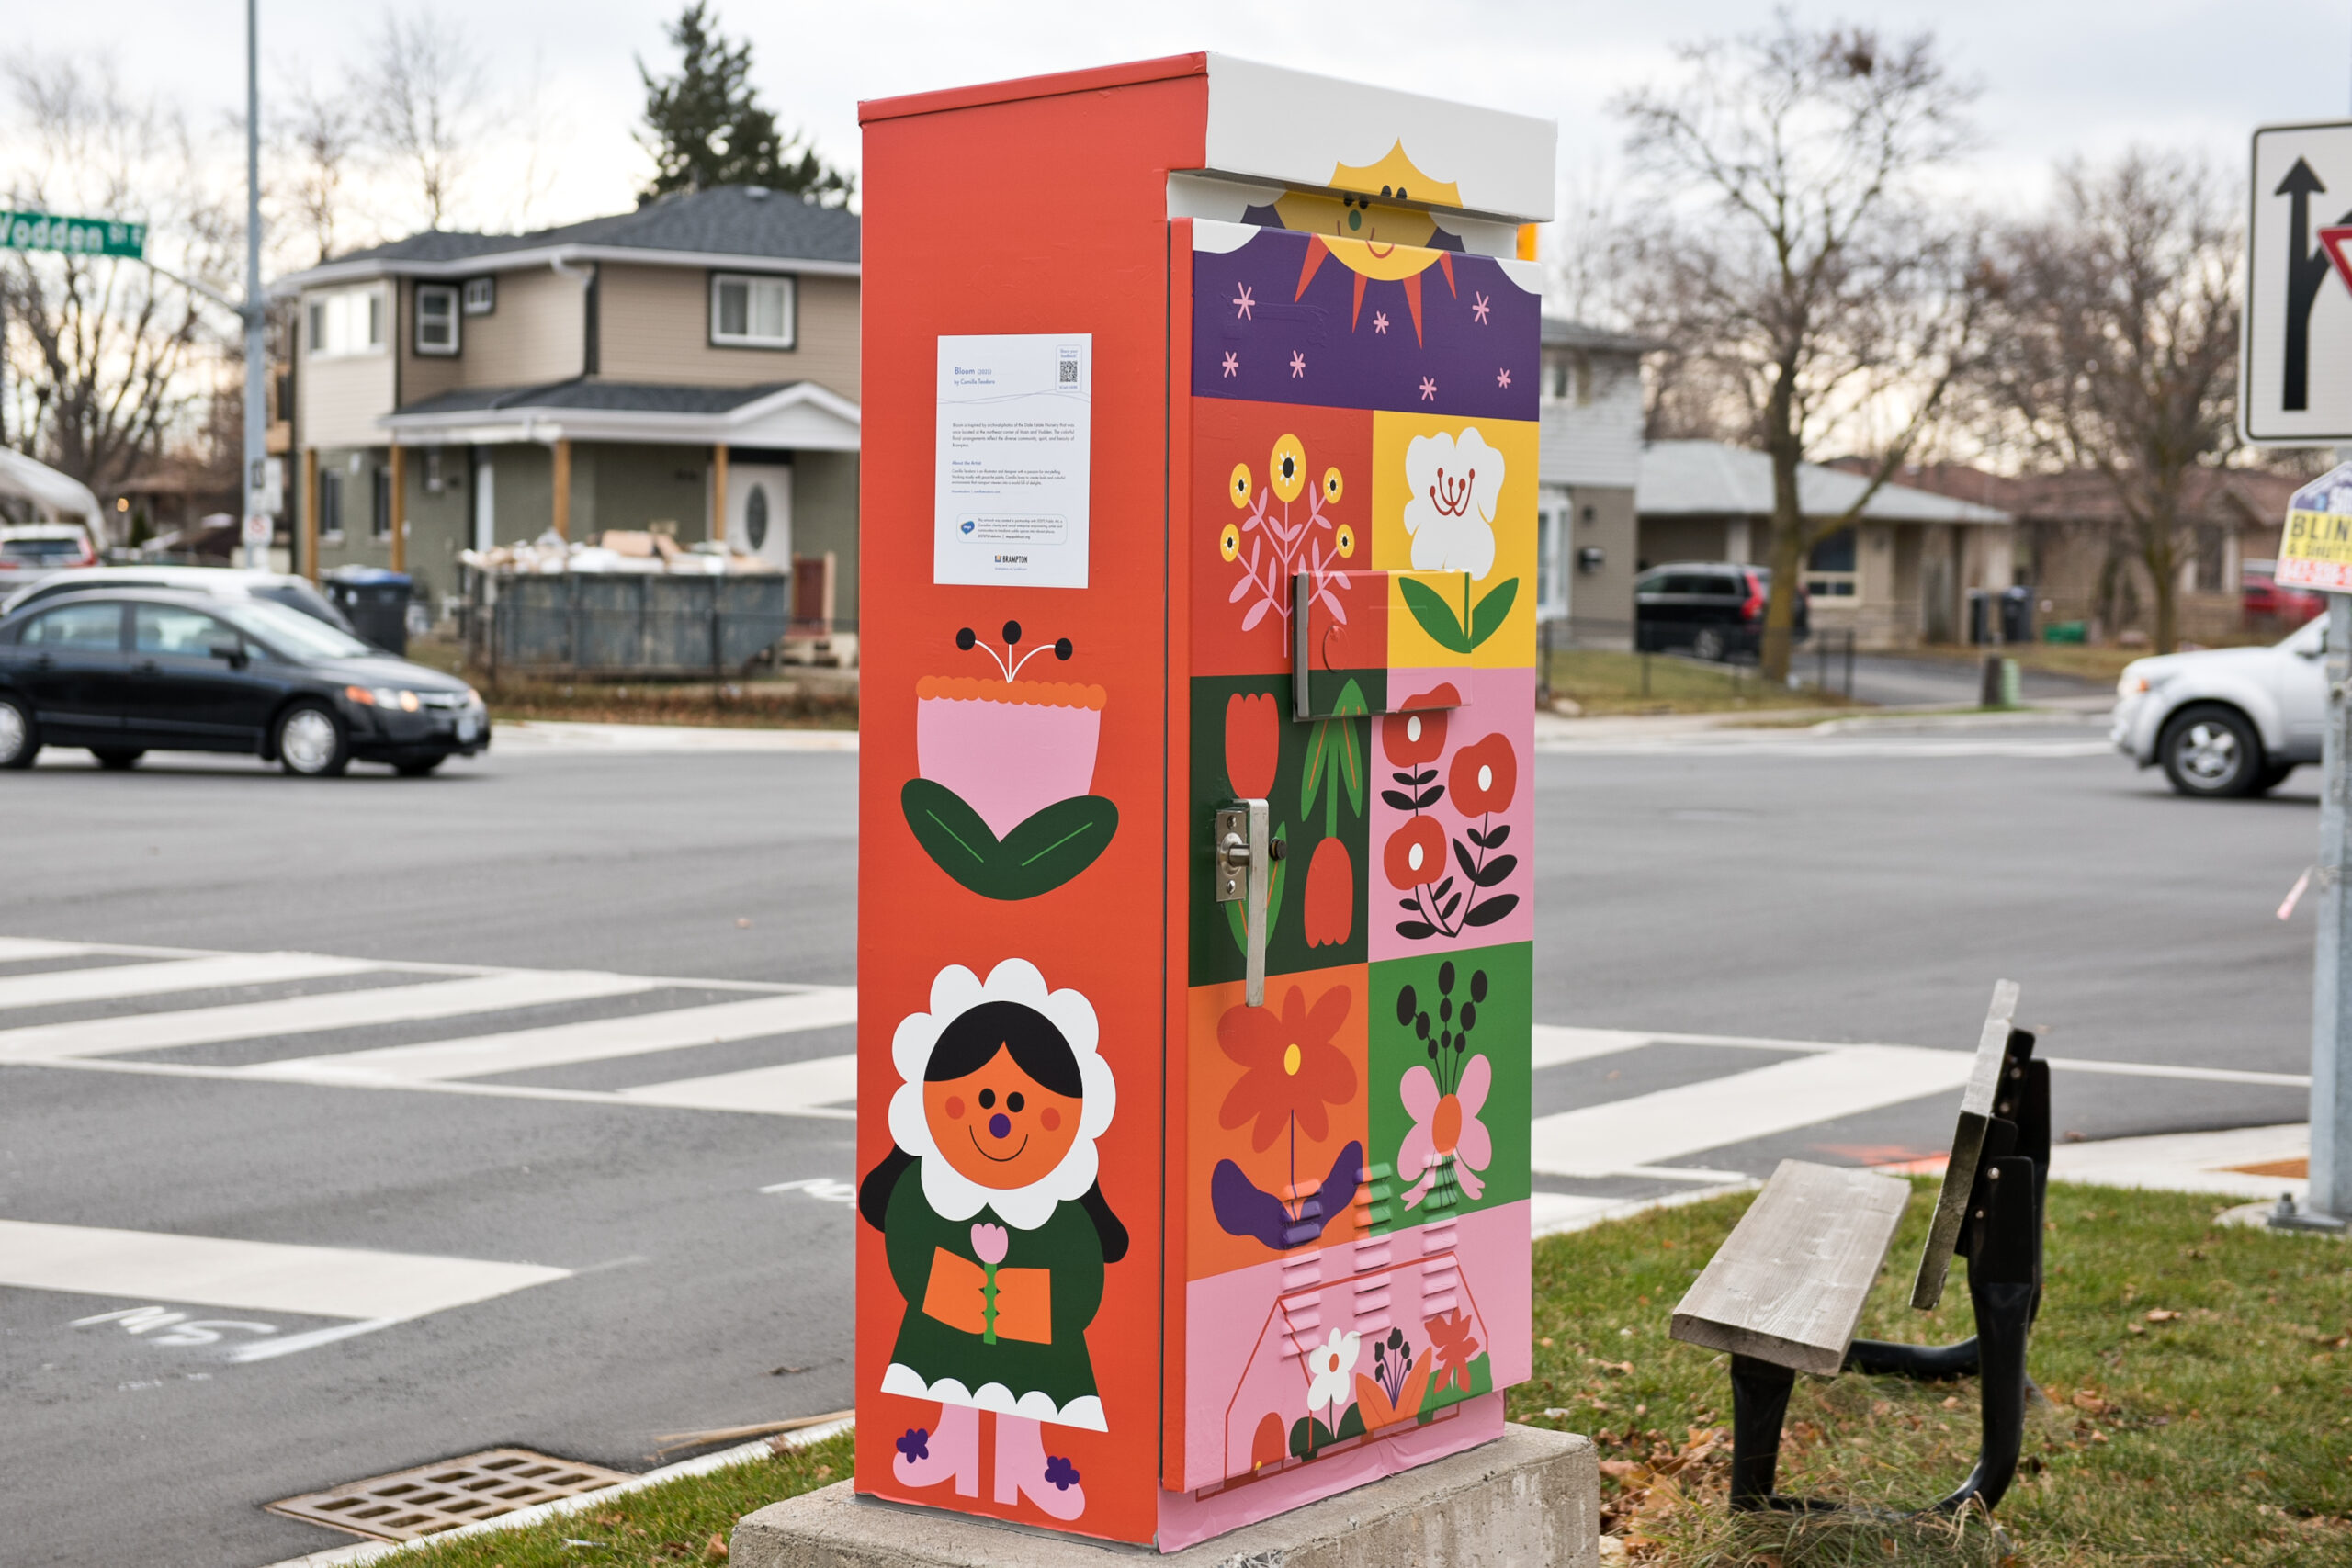 Photo of a traffic box with artwork by Camilla Teodoro; it features a grid/quilt composition with motifs of flowers and wildlife and some characters. It has colours of orange, green, and pink prominently.